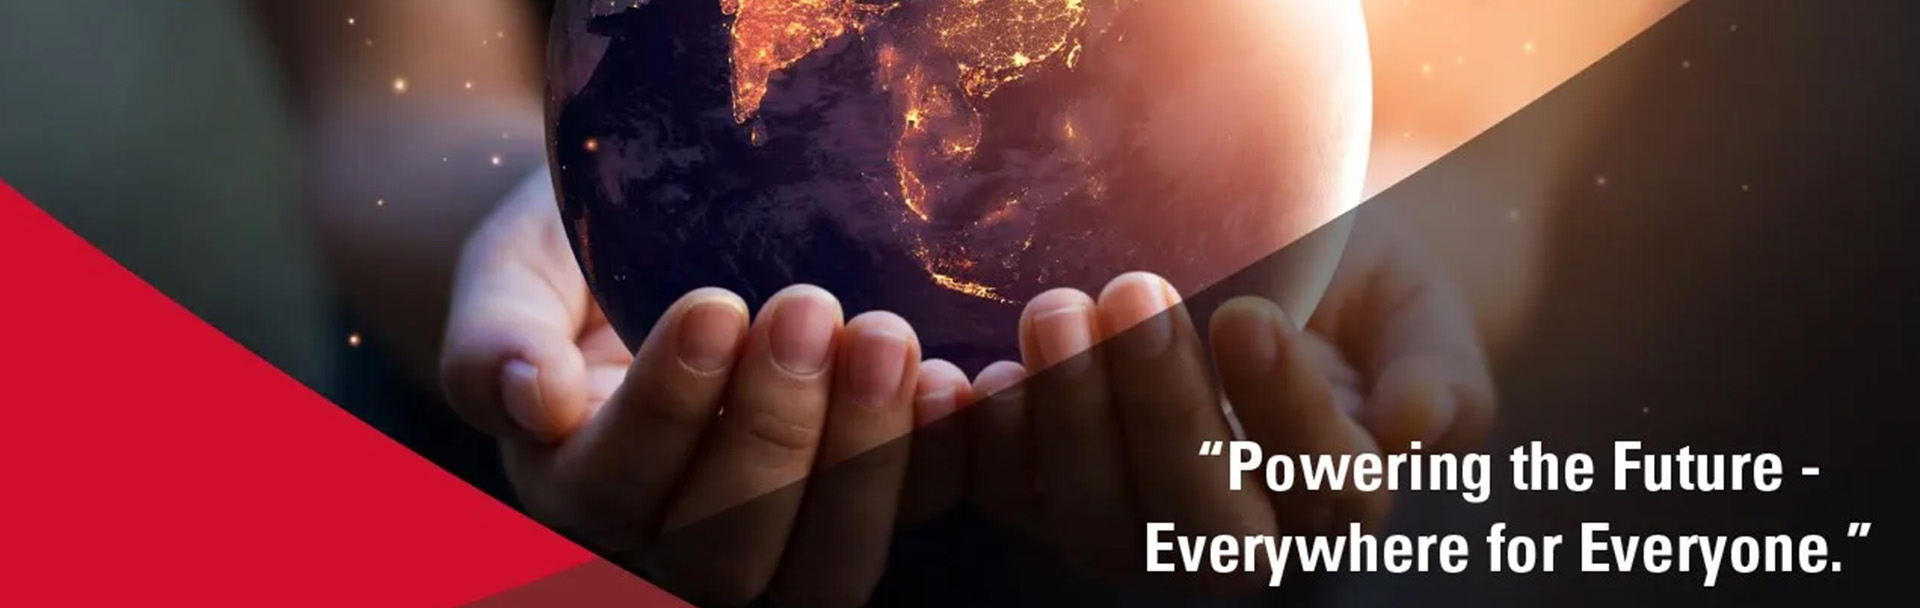 Hands holding the world with the text Powering the Future - Everywhere for Everyone